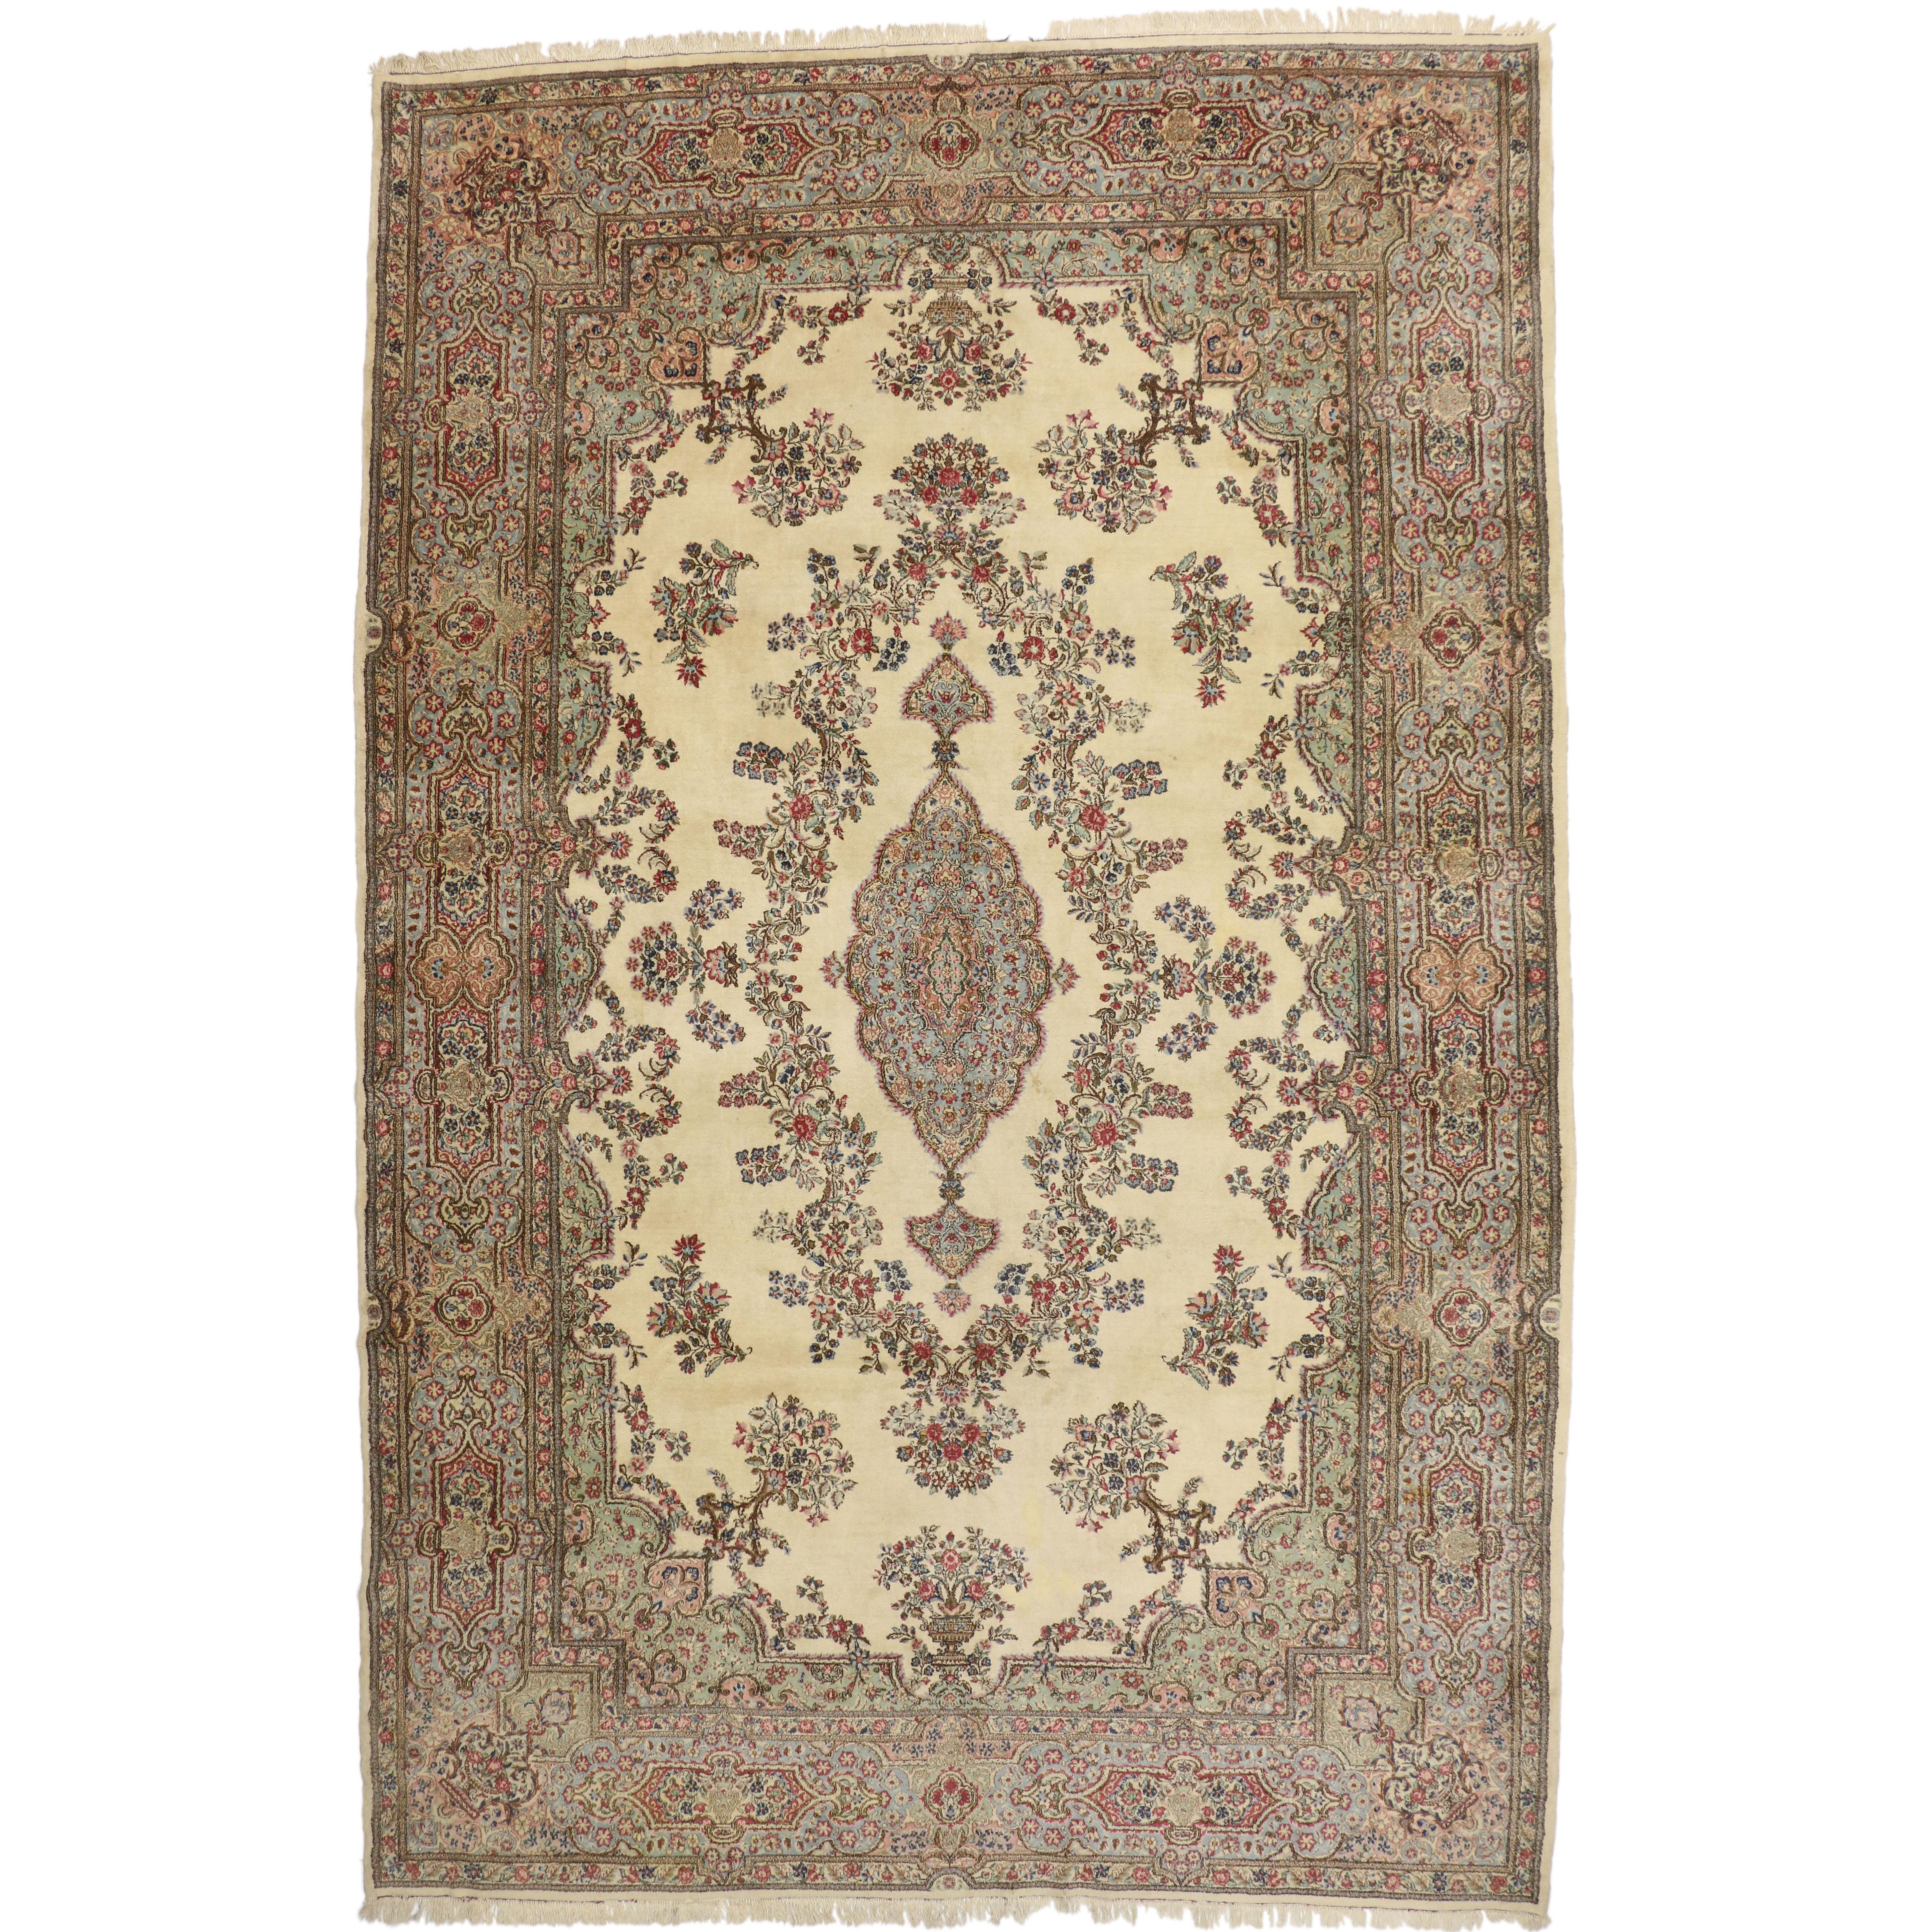 Oversized Antique Persian Kerman Rug with Romantic French Provincial Style